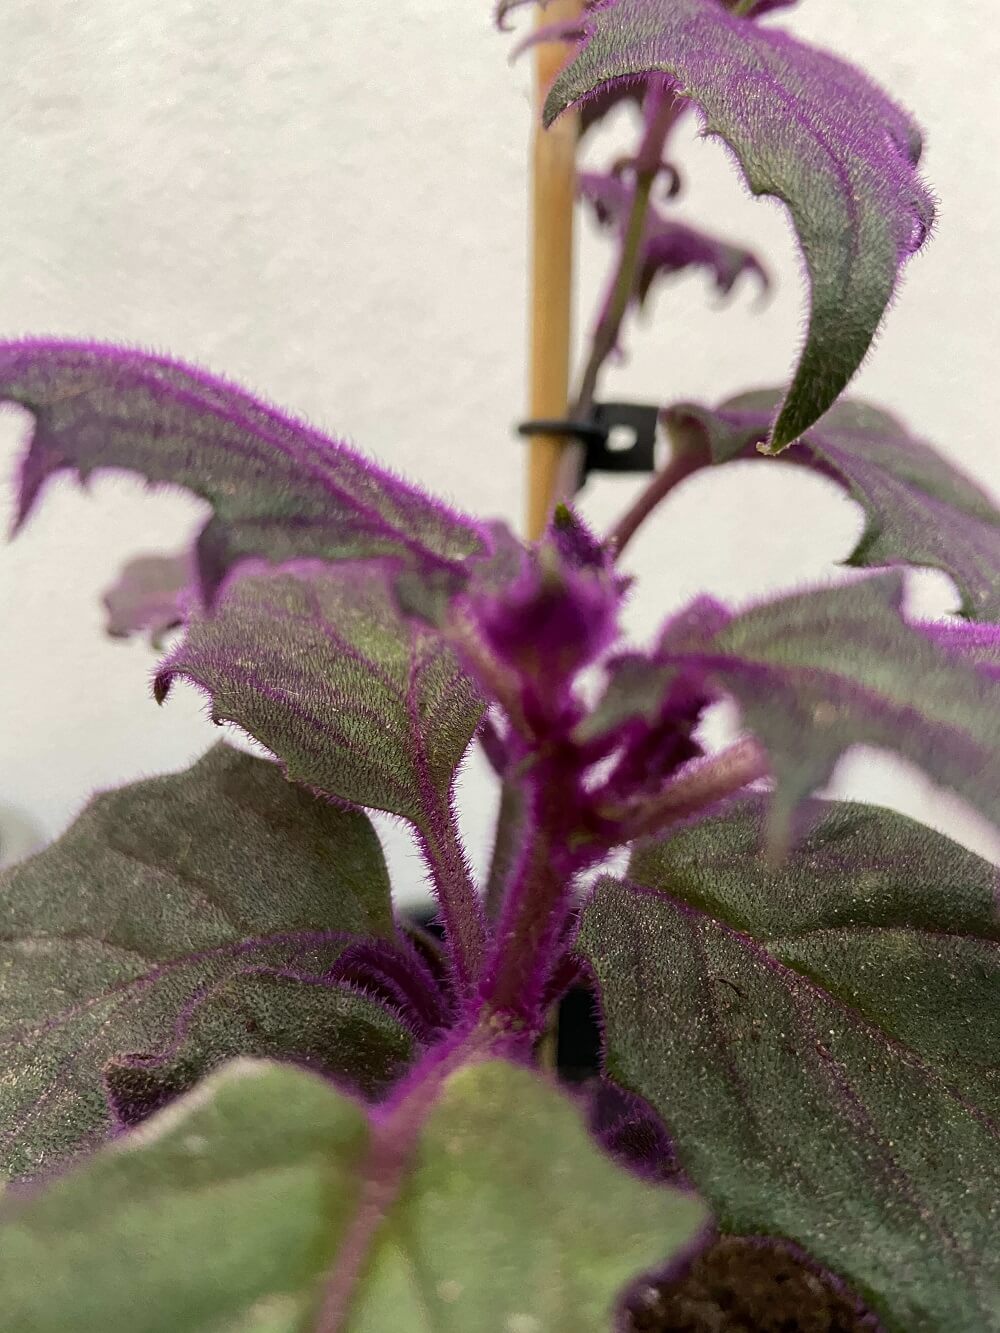 Purple passion plant with purple hair zoomed in.